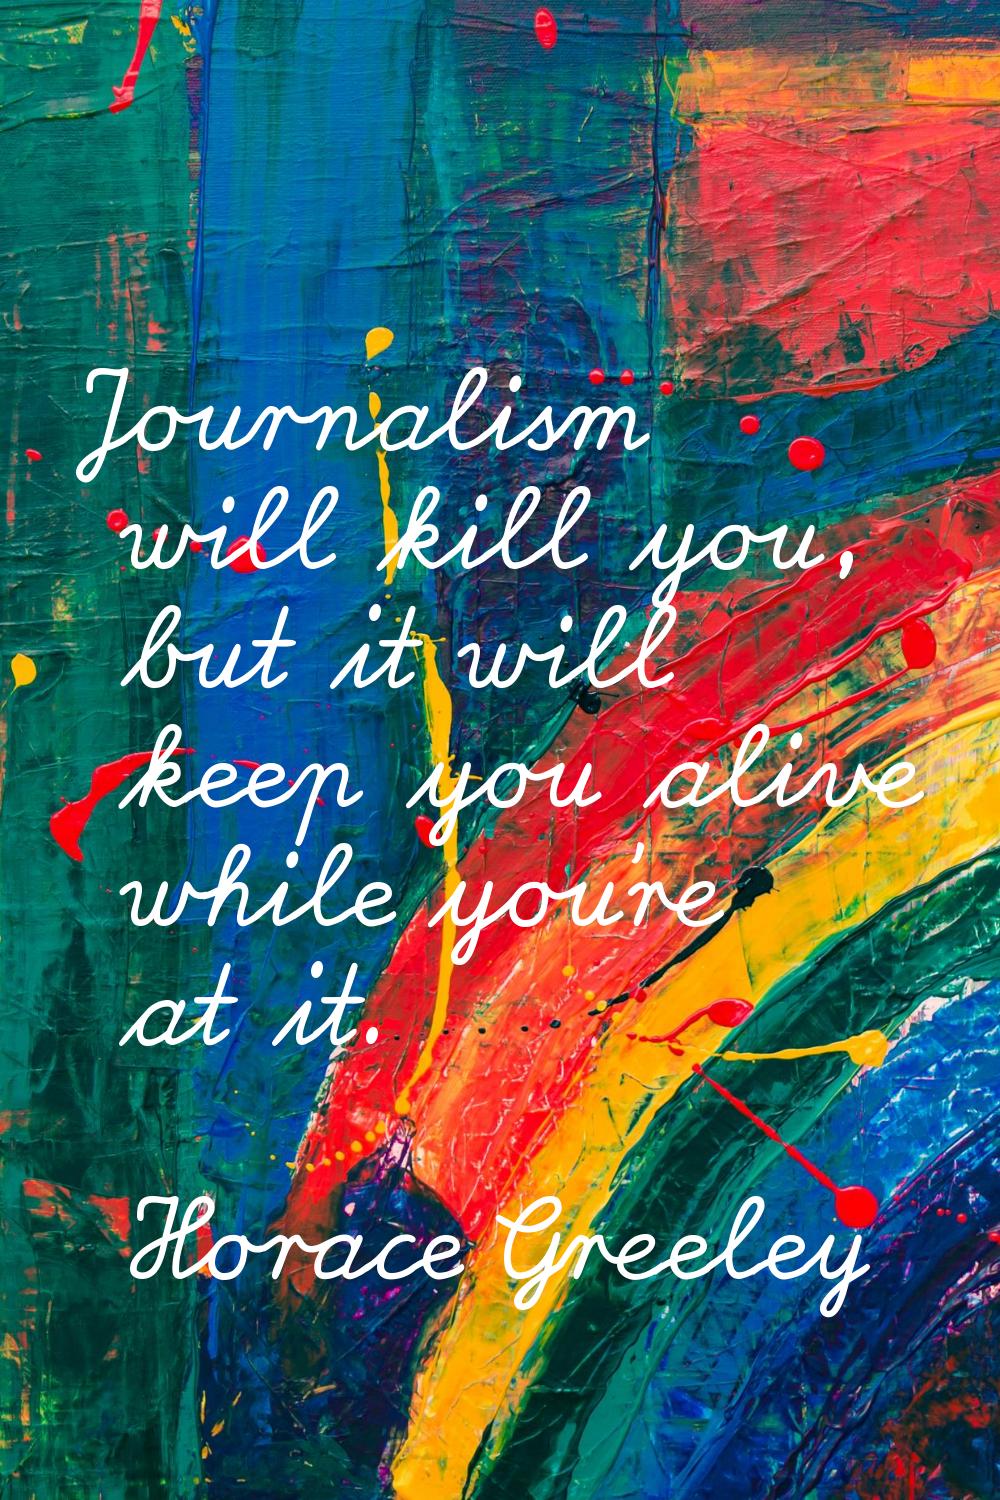 Journalism will kill you, but it will keep you alive while you're at it.